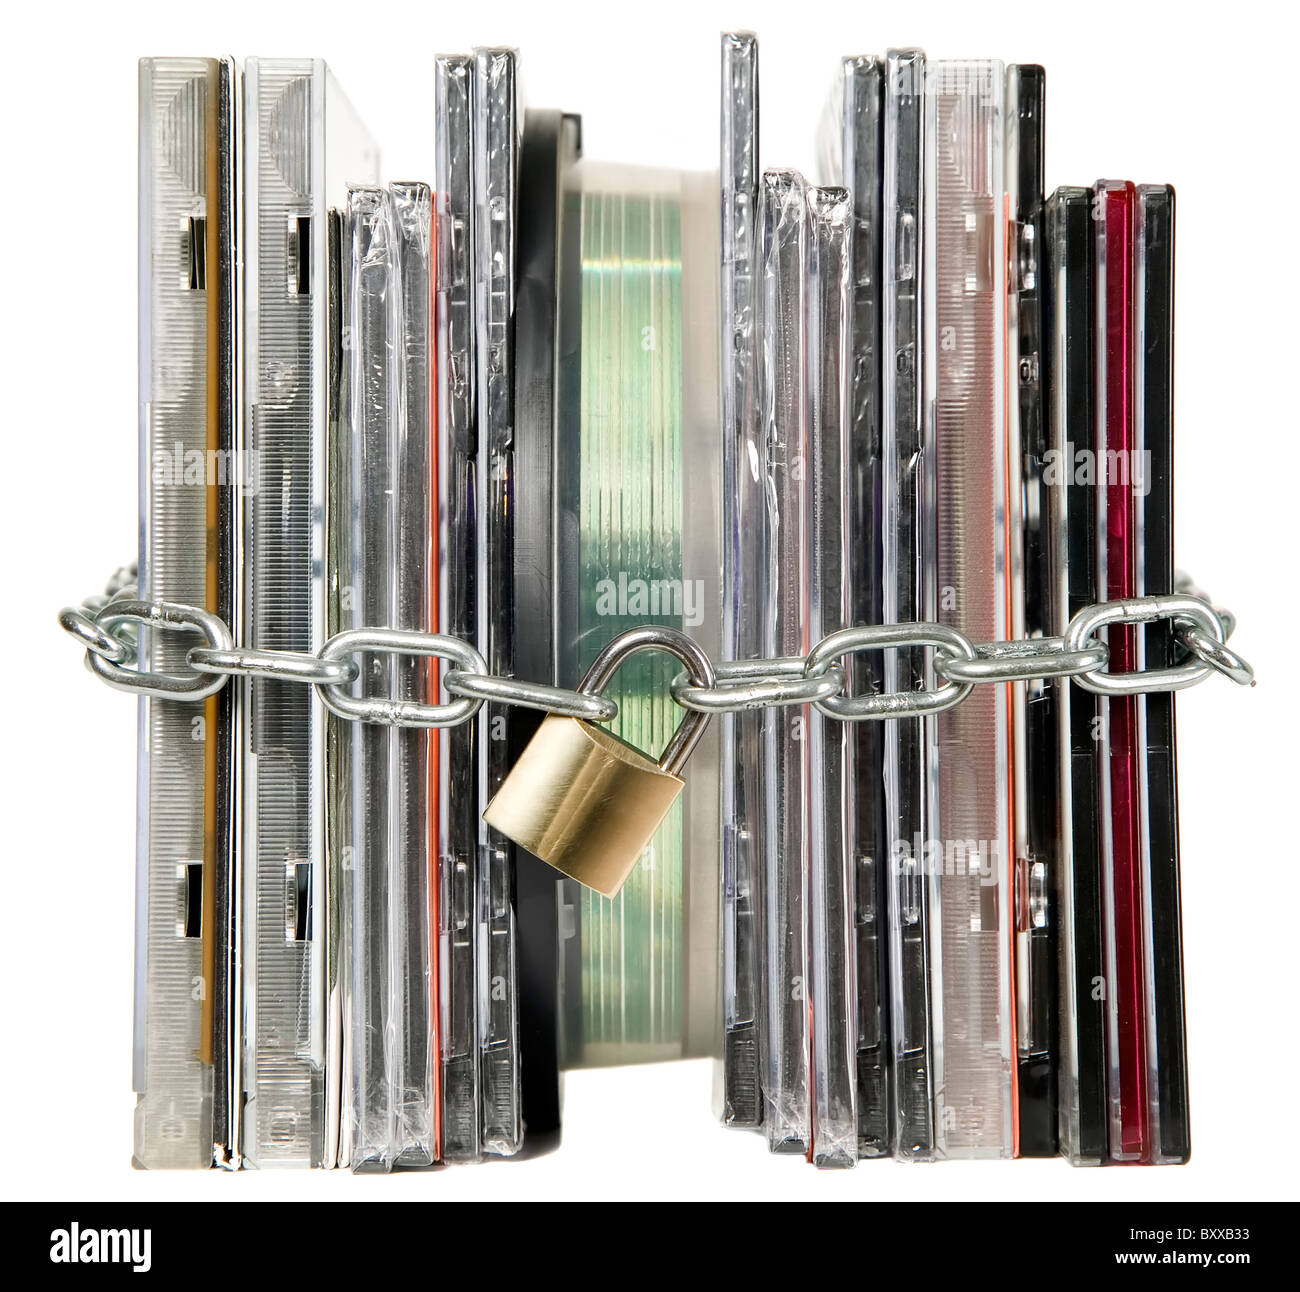 Compact discs are secured with metal chain and lock Stock Photo